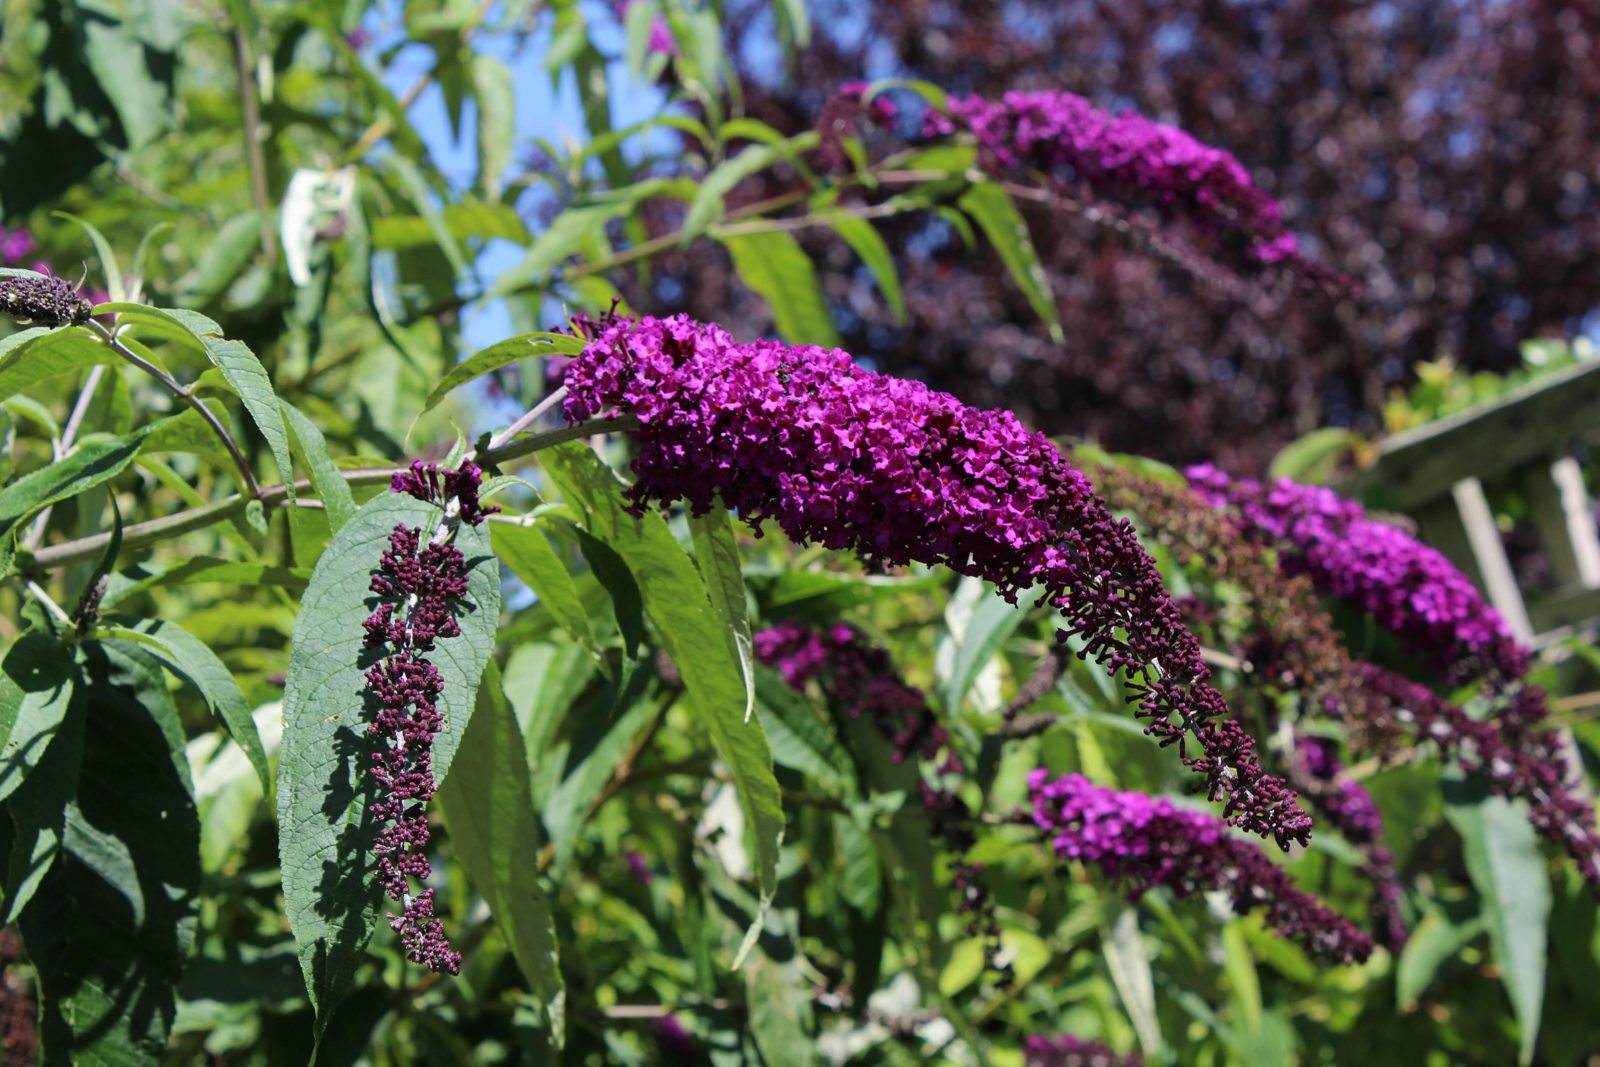 Buddleia, also known as butterfly bush